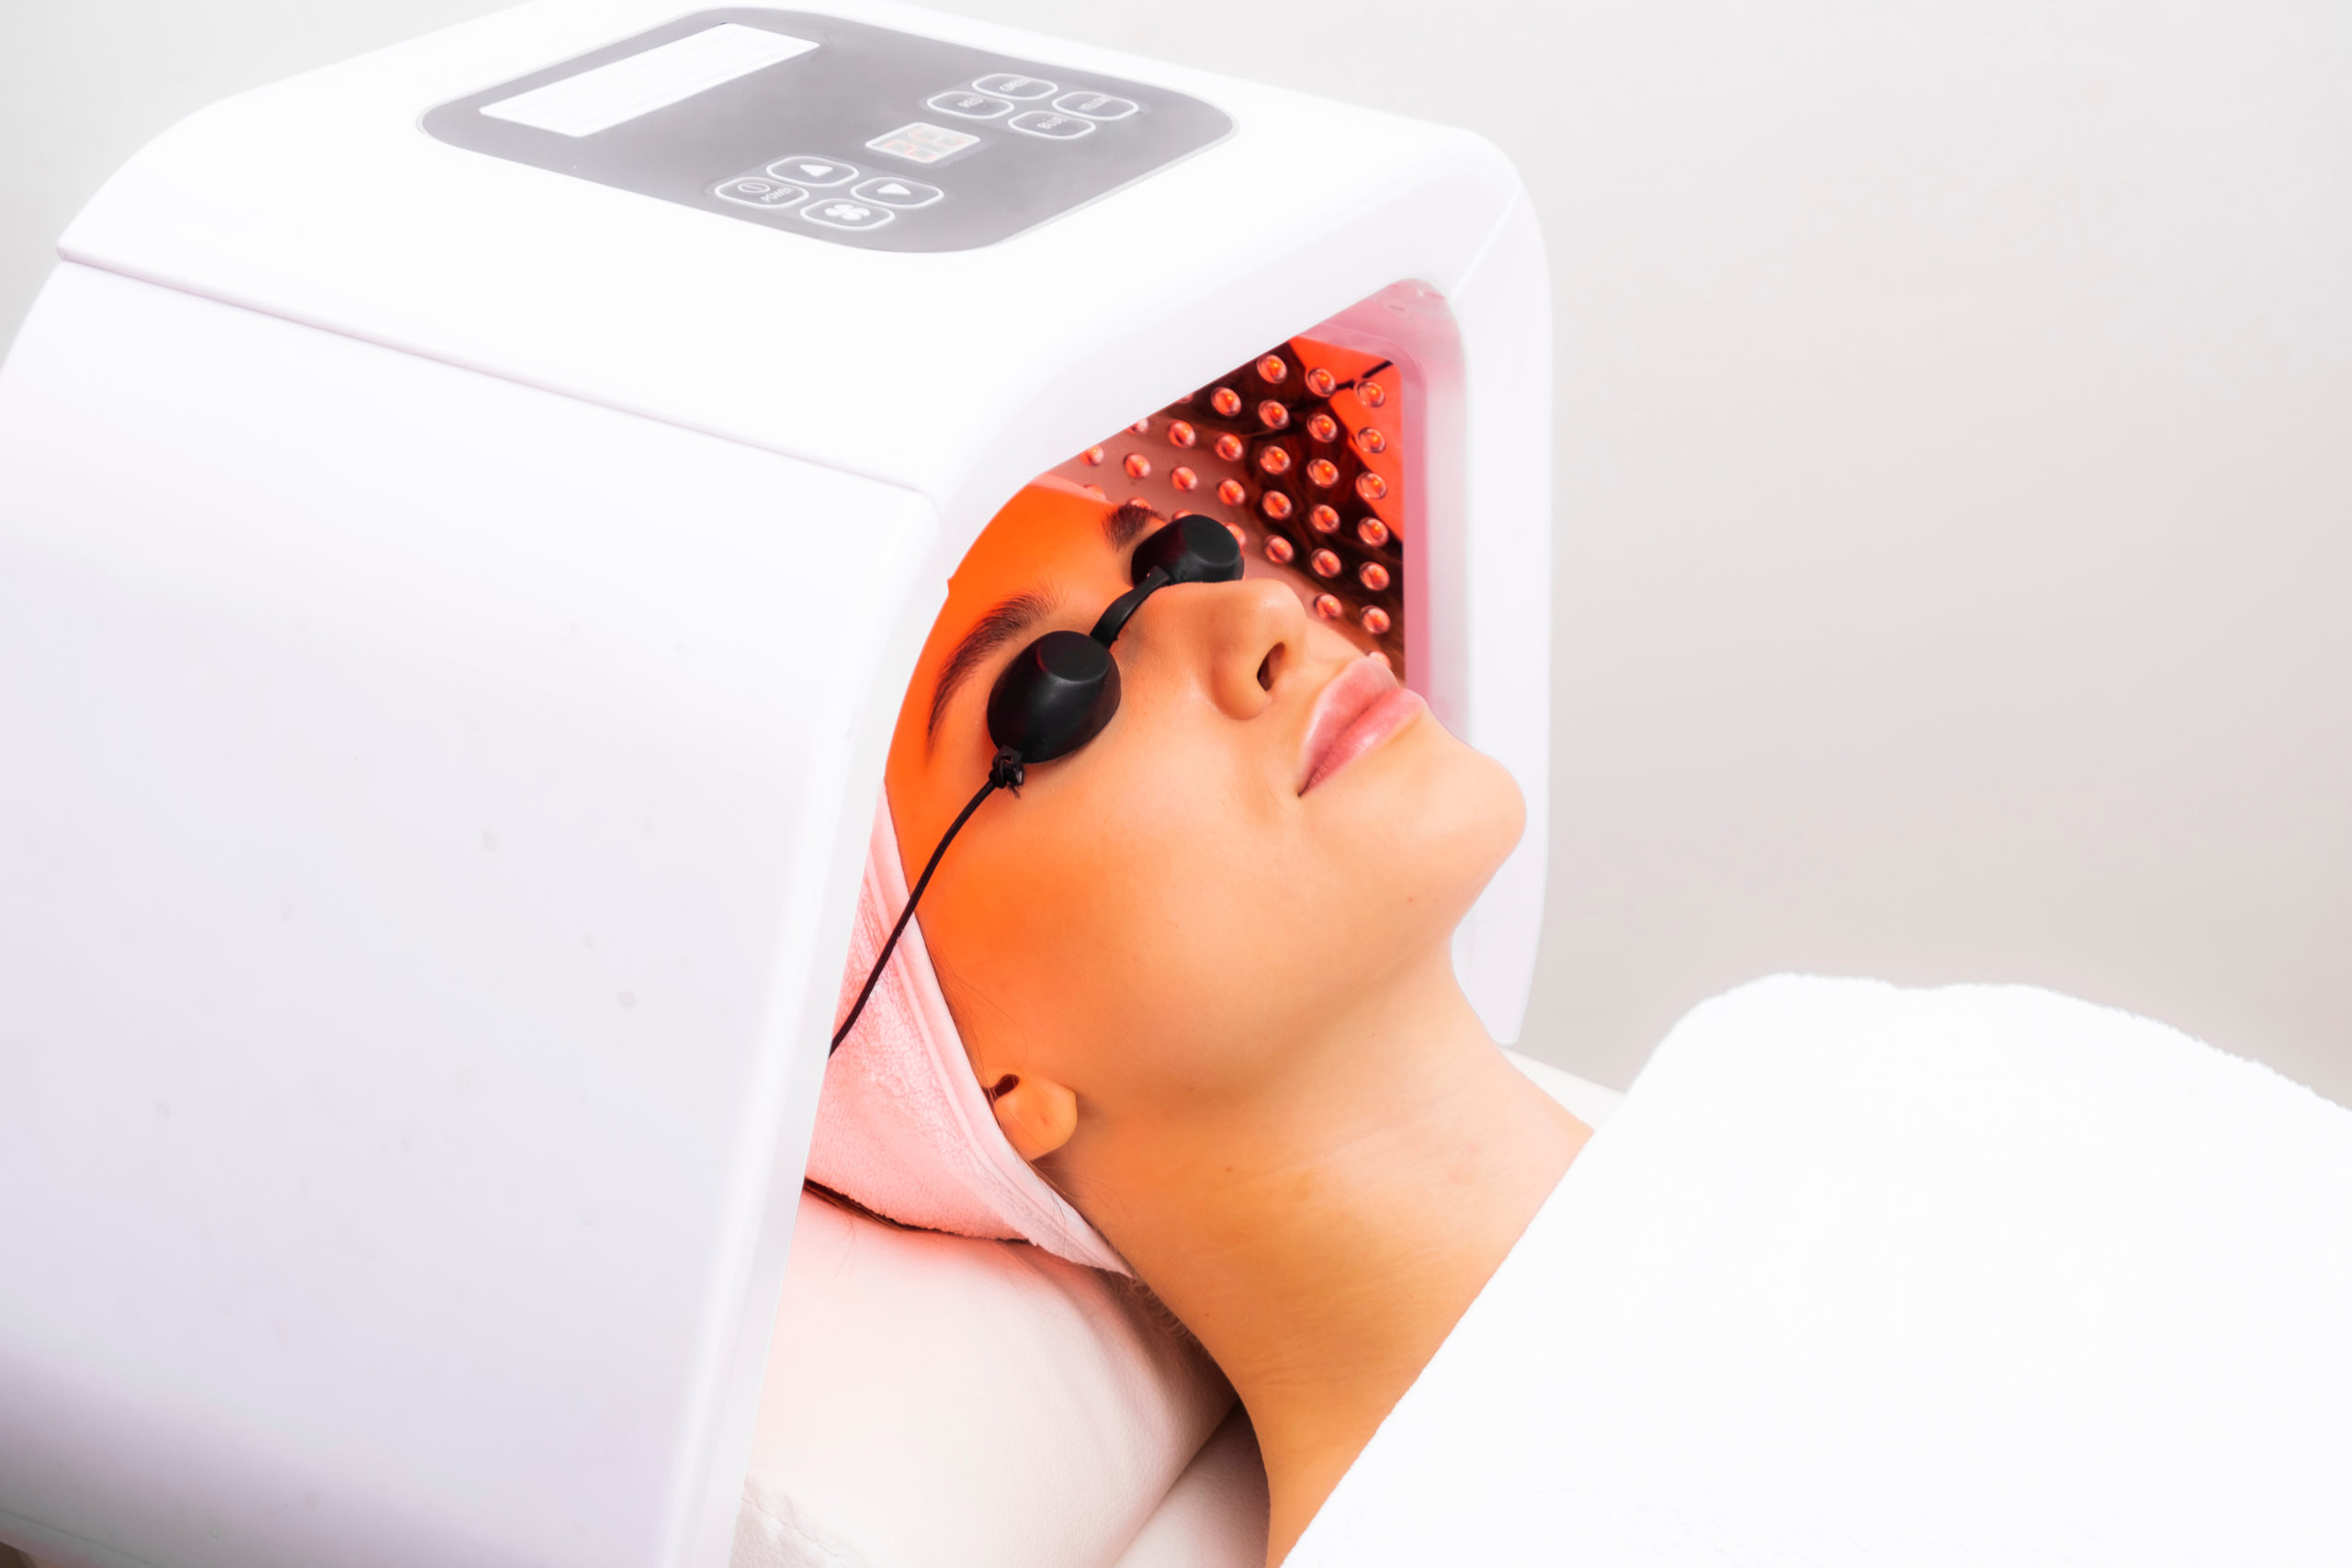 What Is LED Light Therapy, And What Are The Benefits?